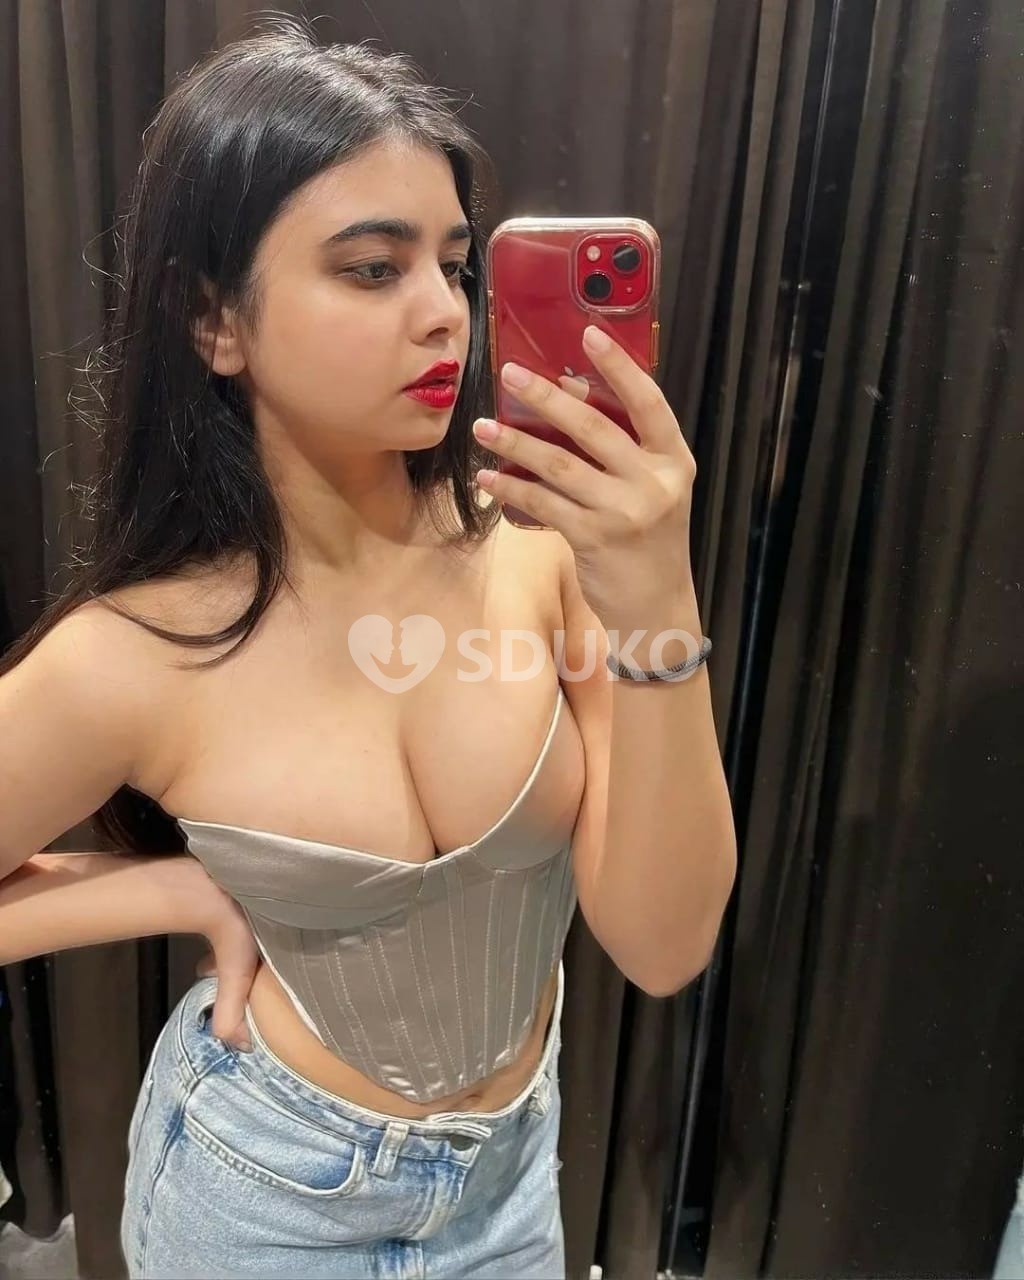 Viman nagar ❤️24x7 AFFORDABLE CHEAPEST RATE SAFE CALL GIRL SERVICE